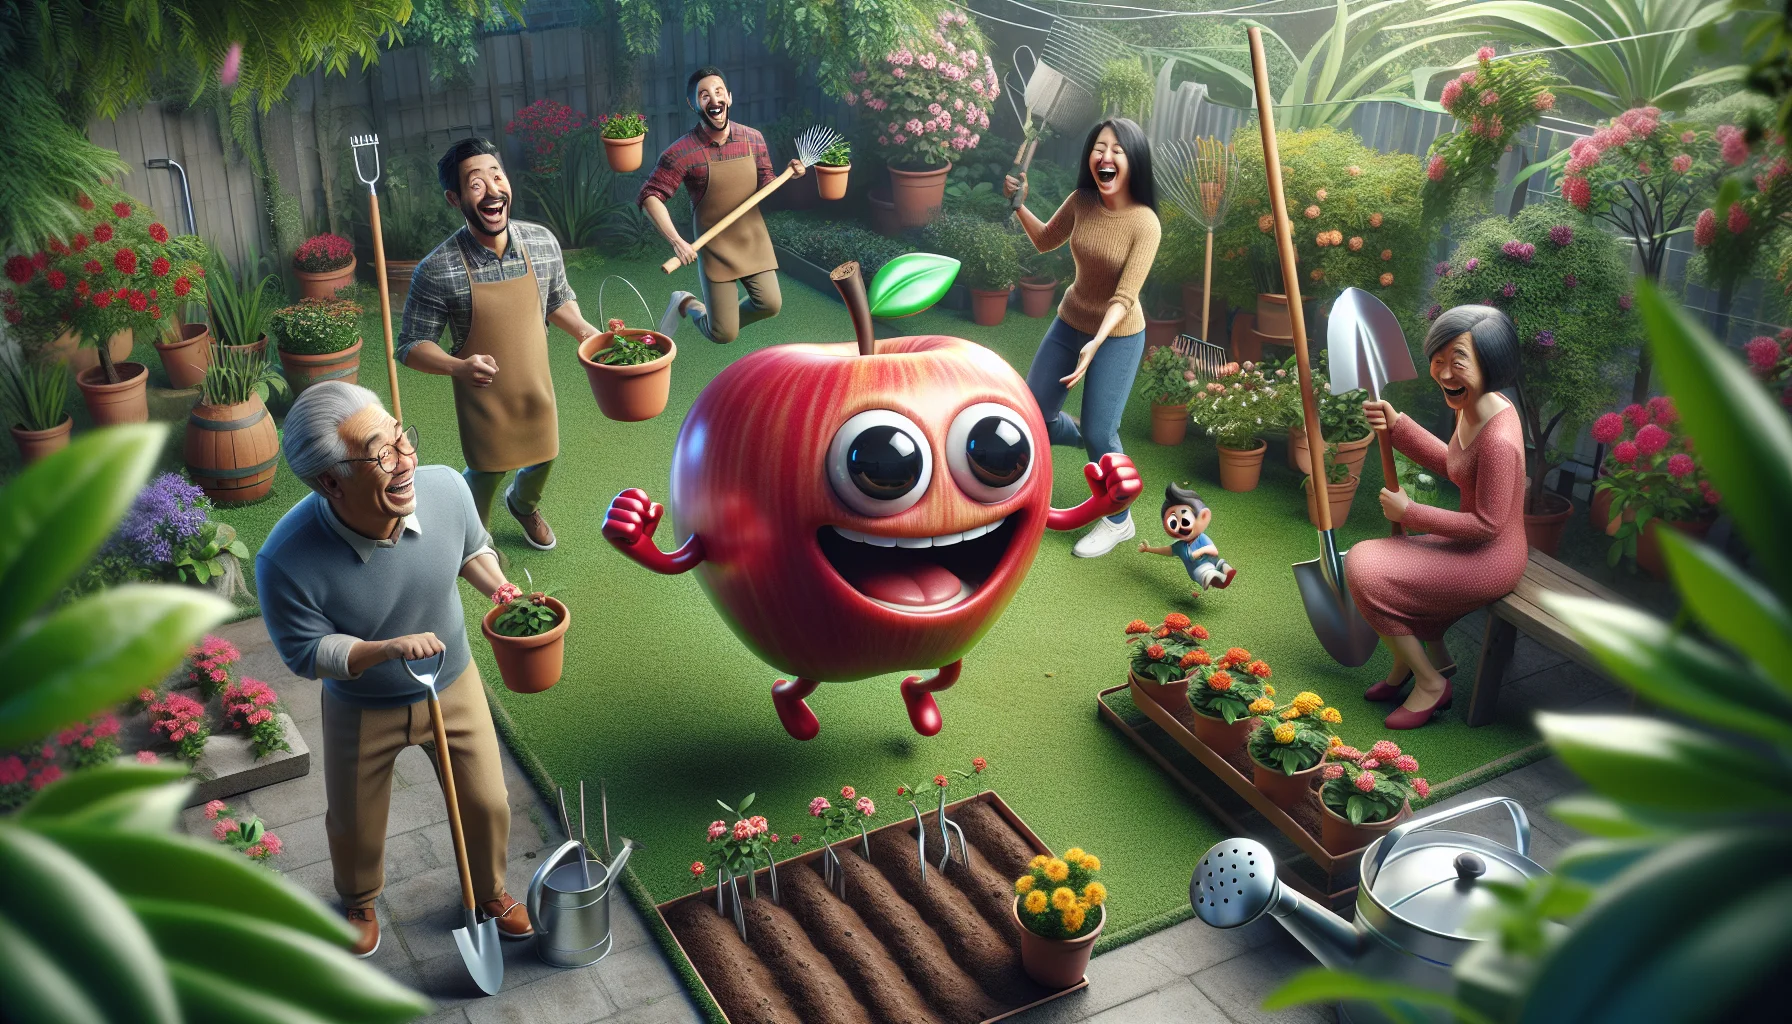 Create a realistic, detailed image of a humorous scene in a lush garden. The central focus is an apple-like fruit with cartoonish googly eyes and a broad smile. It's joyfully jumping around, encouraging people around it to take part in gardening activities. To its side, there are some garden tools - a shovel, a rake, and a watering can - also animated with similar cheerful expressions. The people in the image, an Asian man holding a pot of flowers with curiosity, a black woman laughing while holding a pair of gardening shears, and a white child planting seeds with eagerness, all reflecting the fun atmosphere.